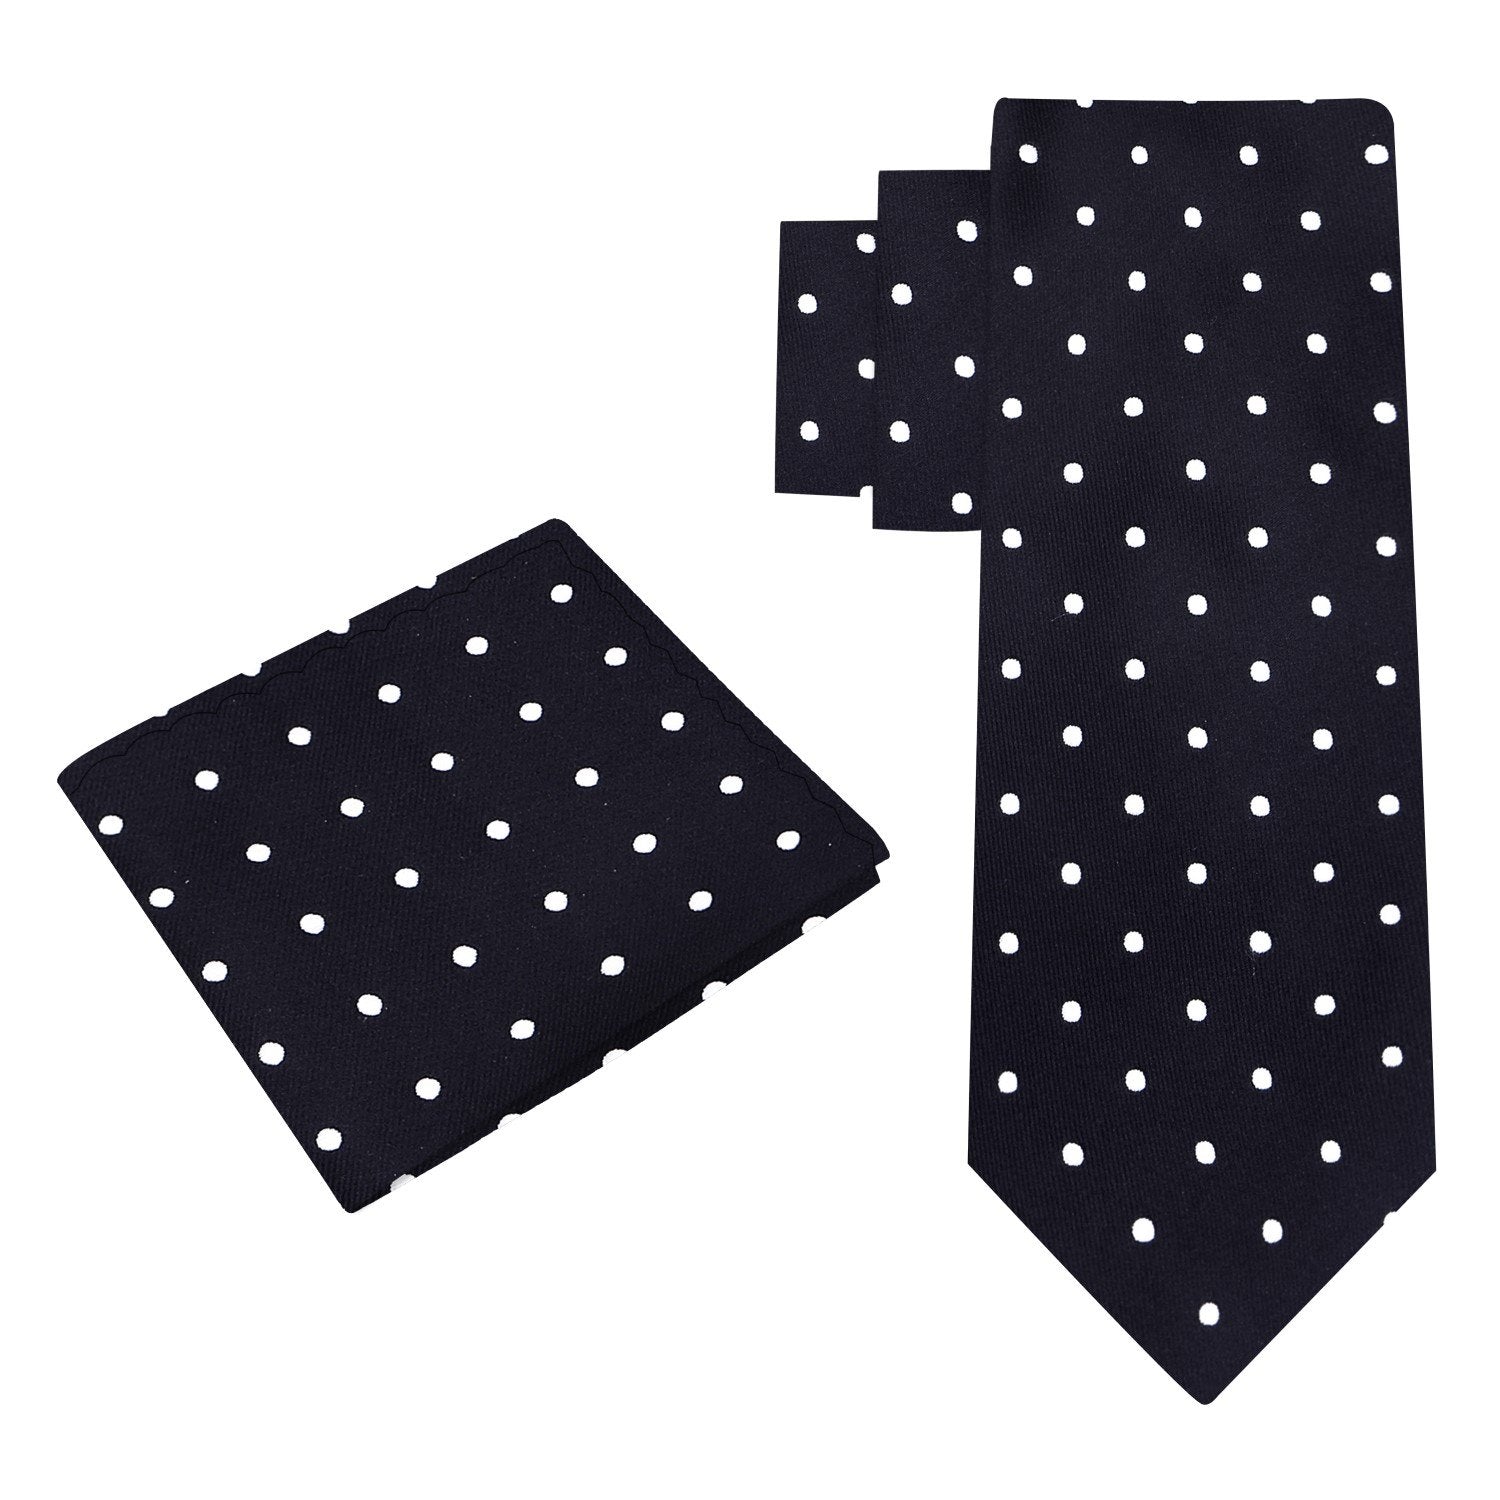 Alt View: Black with Small White Dots tie and Pocket Square